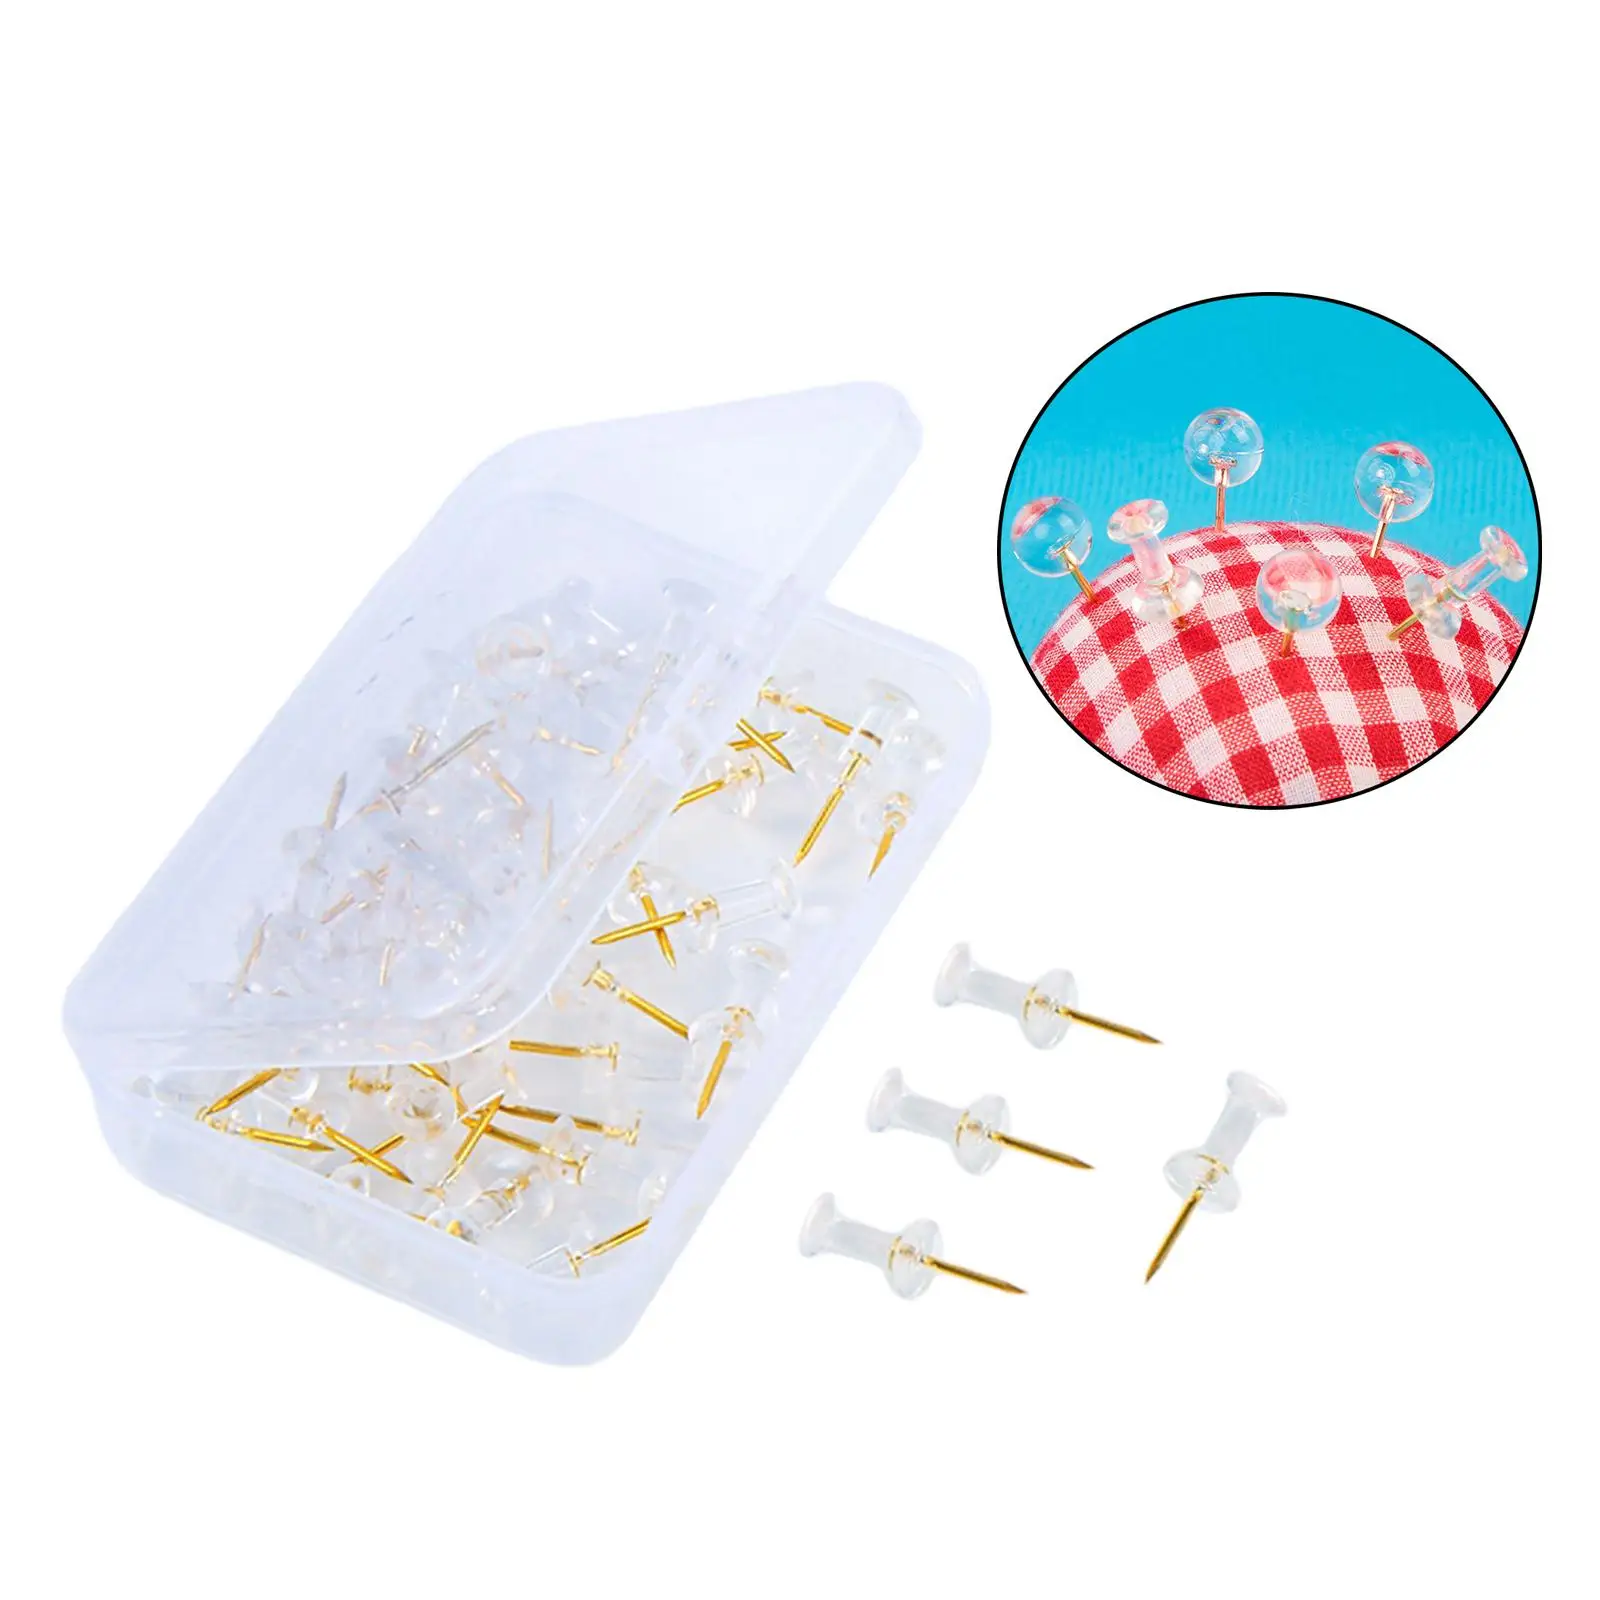 100Pcs Sewing Pins Positioning Pins Accessories DIY Lightweight with Storage Box for Crafting Sewing Dressmaker Quilting Tailor